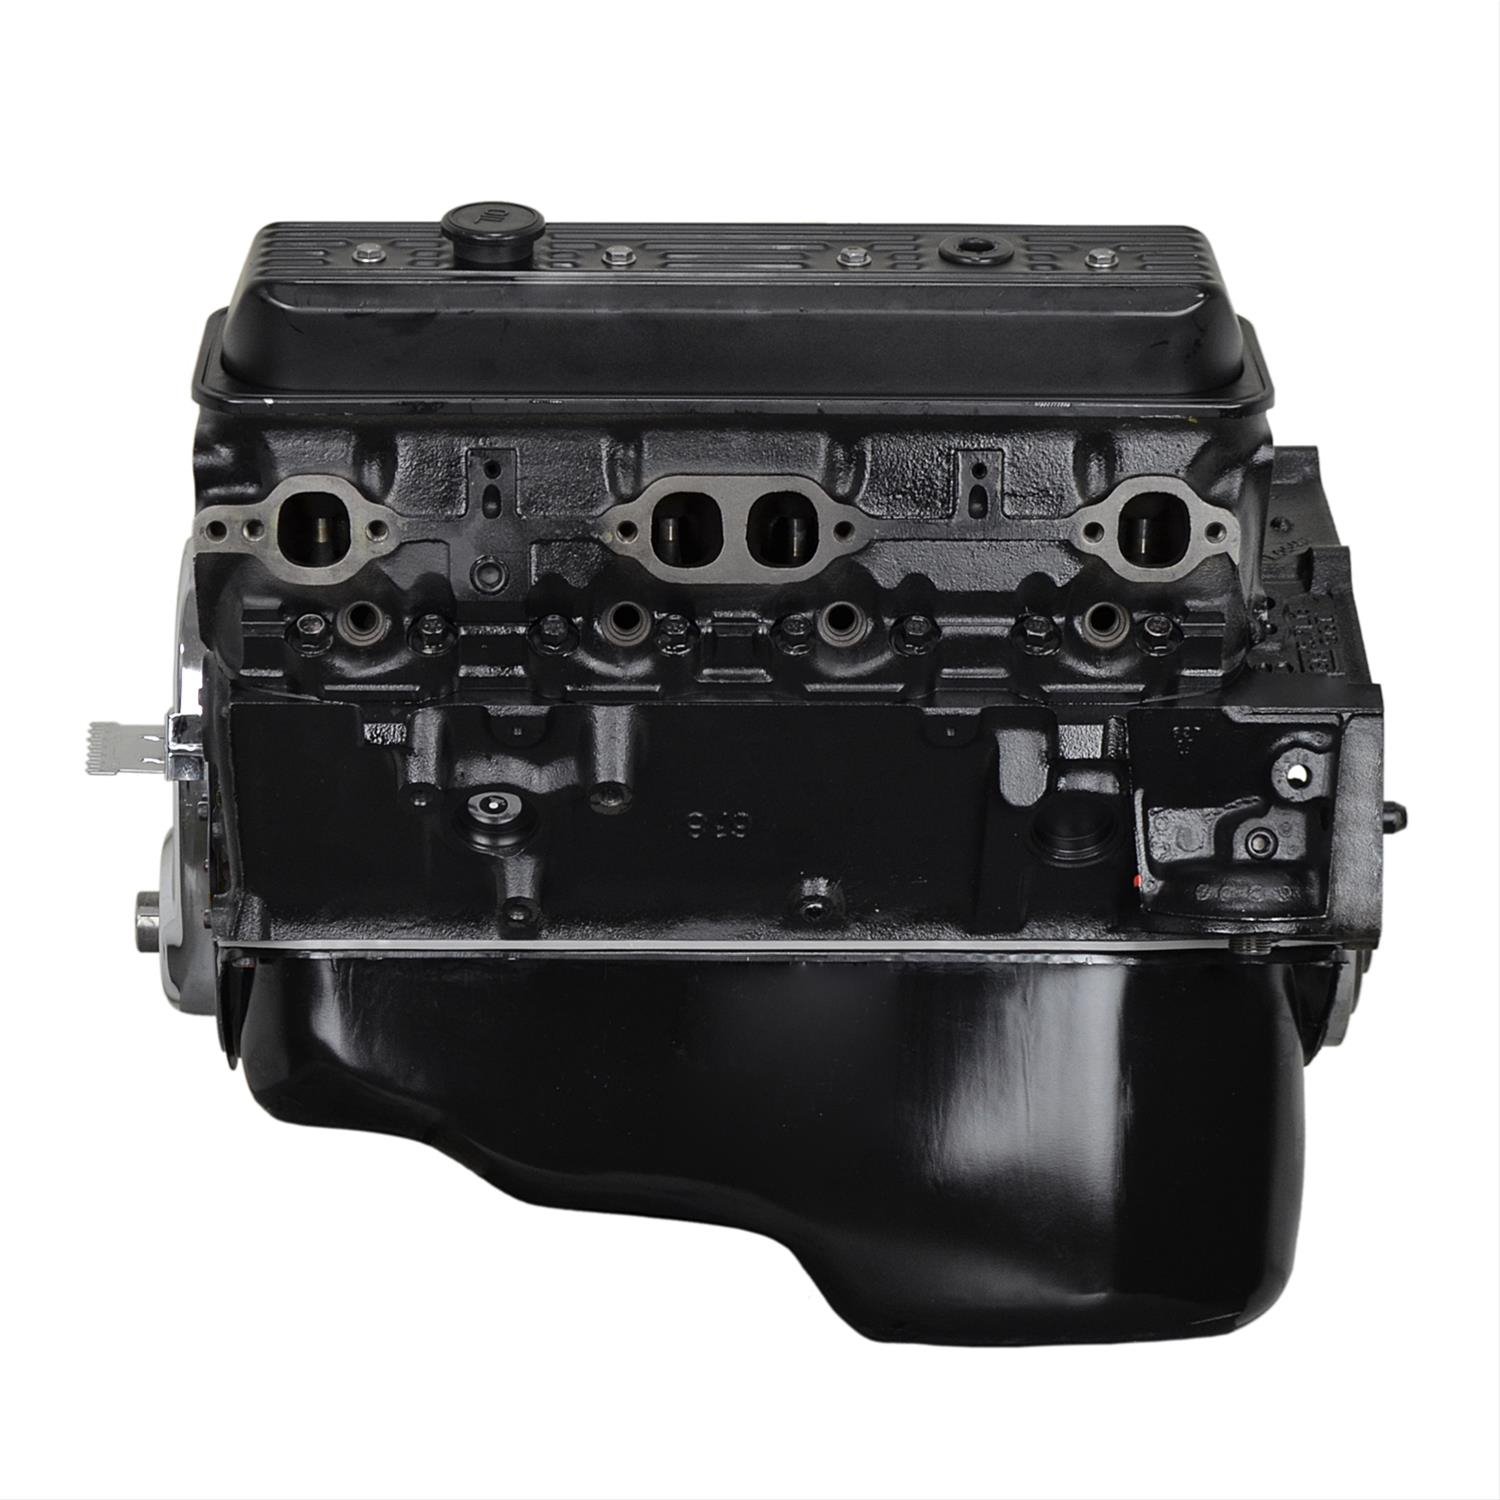 STANDARD ROTATION 260 HP SUPPLIED WITH OIL PAN AND TIMING COVER 1 PIECE REAR MAIN SEAL VALVE COVERS